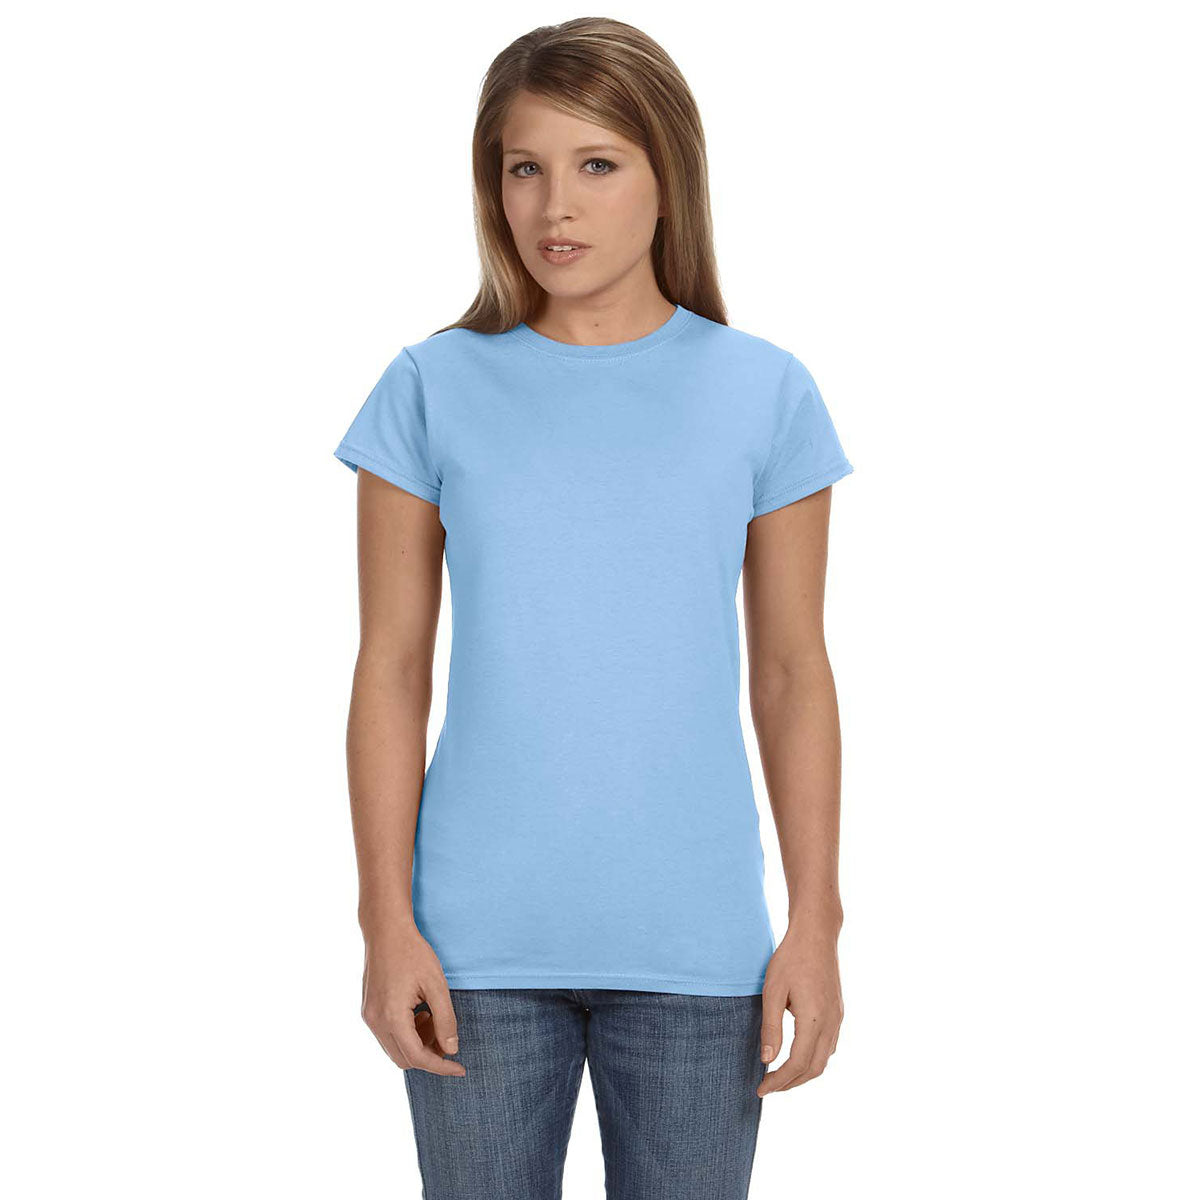 Women's Light Blue Softstyle 4.5 oz. Fitted